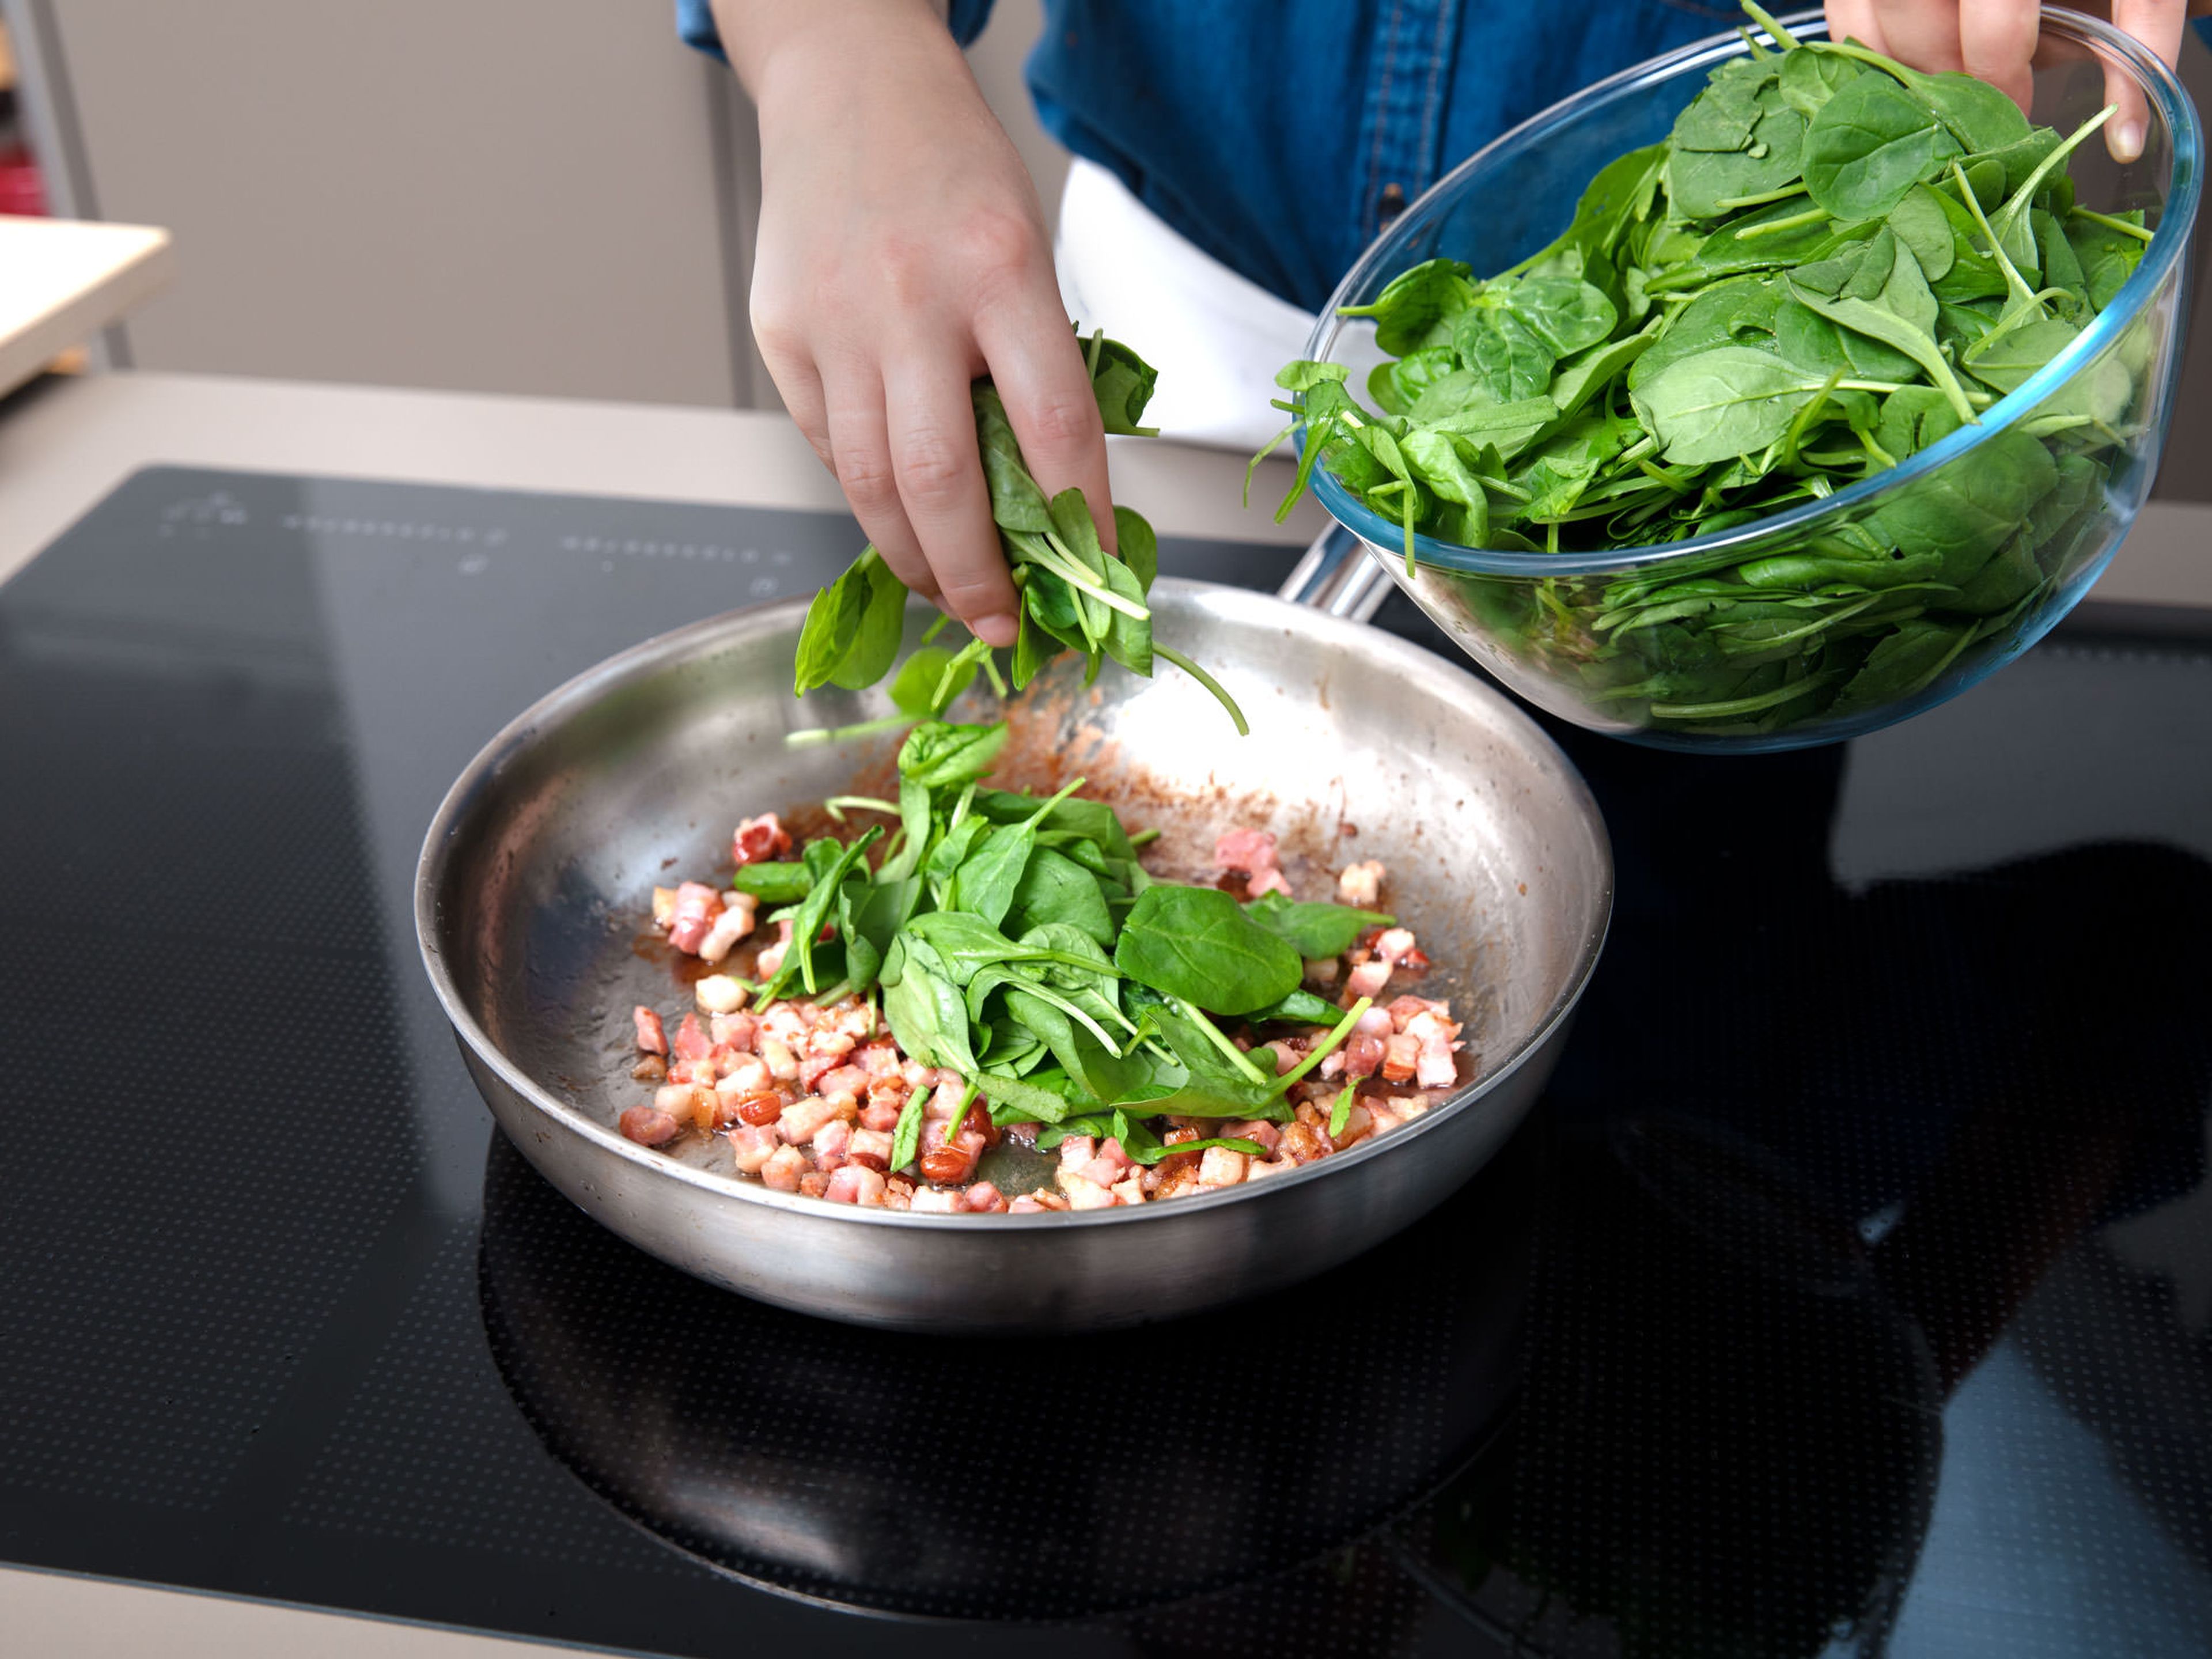 Fry diced smoked bacon in a large frying pan until crispy. Add baby spinach and keep frying until the spinach starts to wilt. Deglaze with half of the lime juice and season with salt and pepper to taste. Remove from heat.